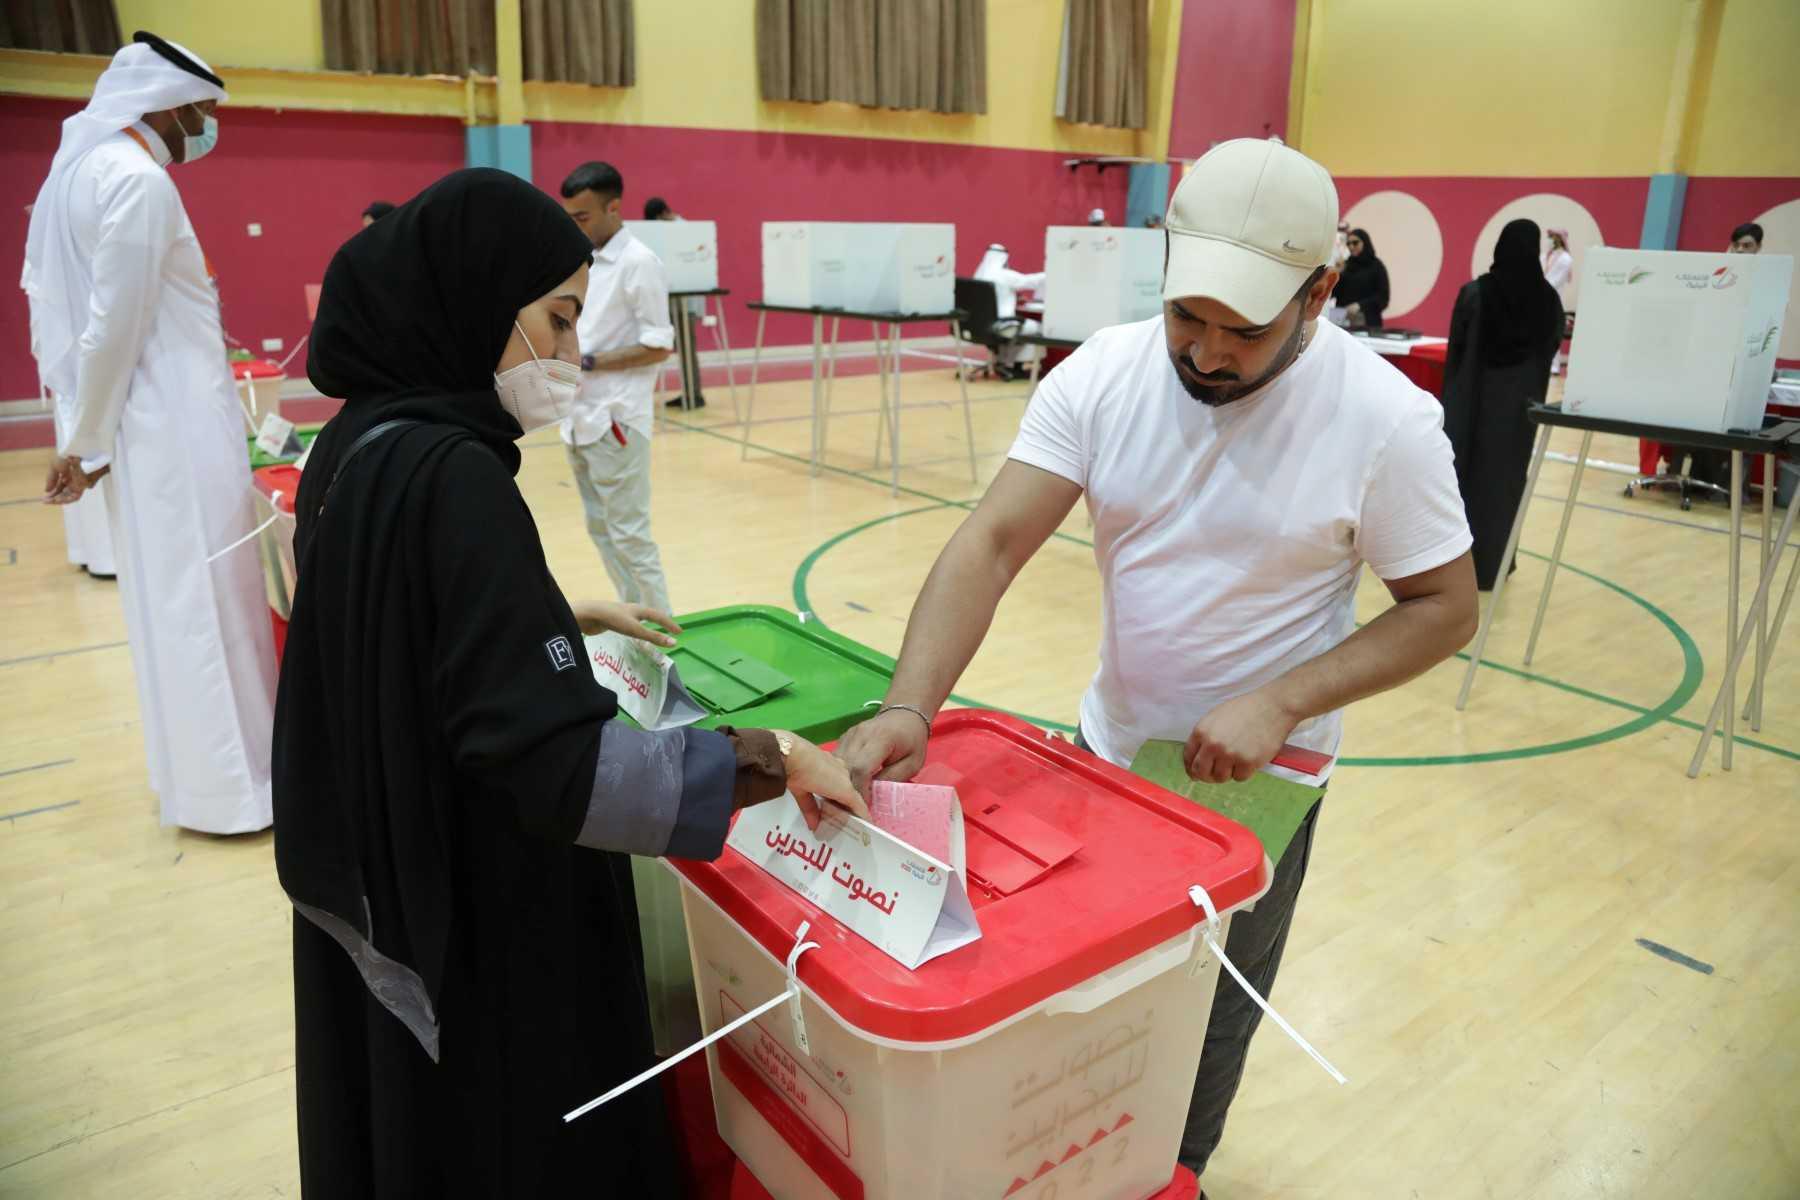 A Bahraini woman casts her ballot at a polling station in the city of Jidhafs, about 3km west of the capital Manama, during parliamentary elections, on Nov 12. Photo: AFP